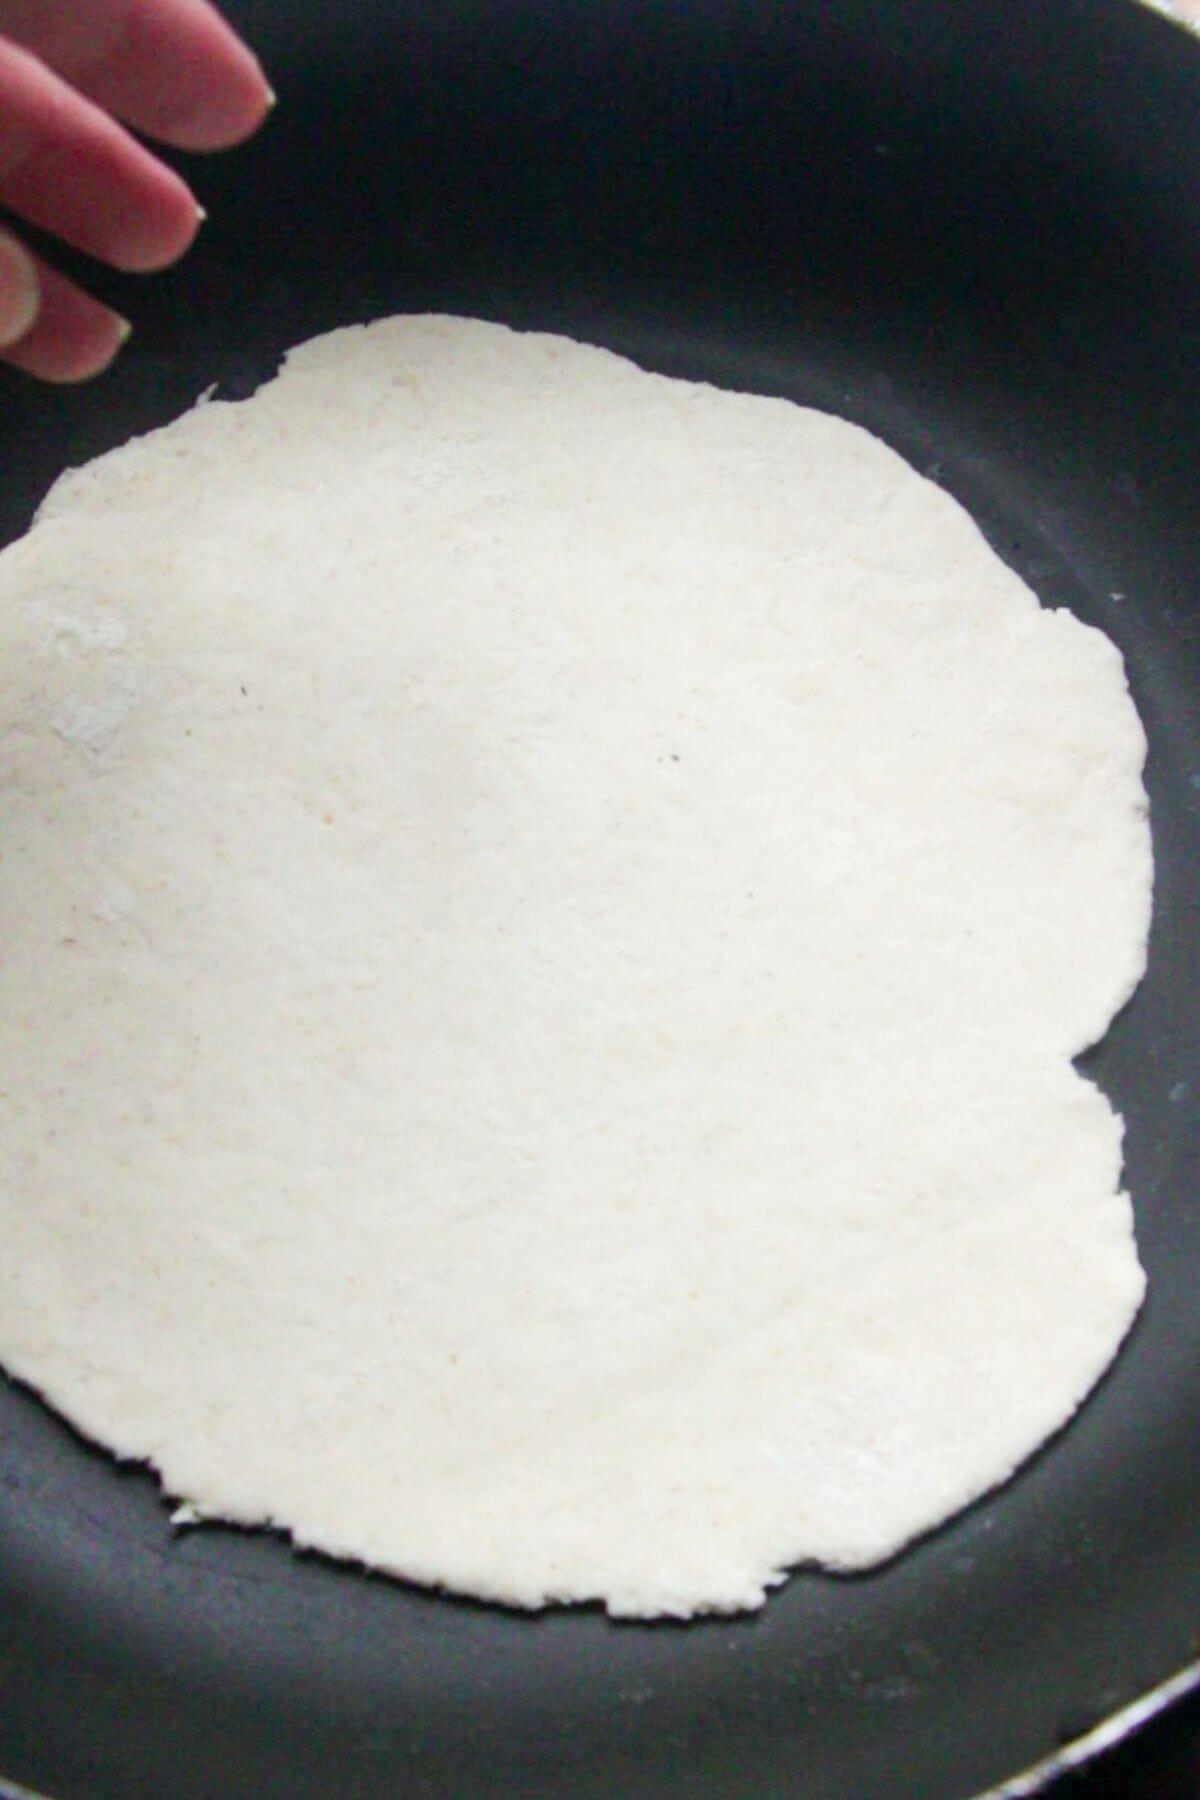 Rolled out naan being placed in a small black pan to cook.